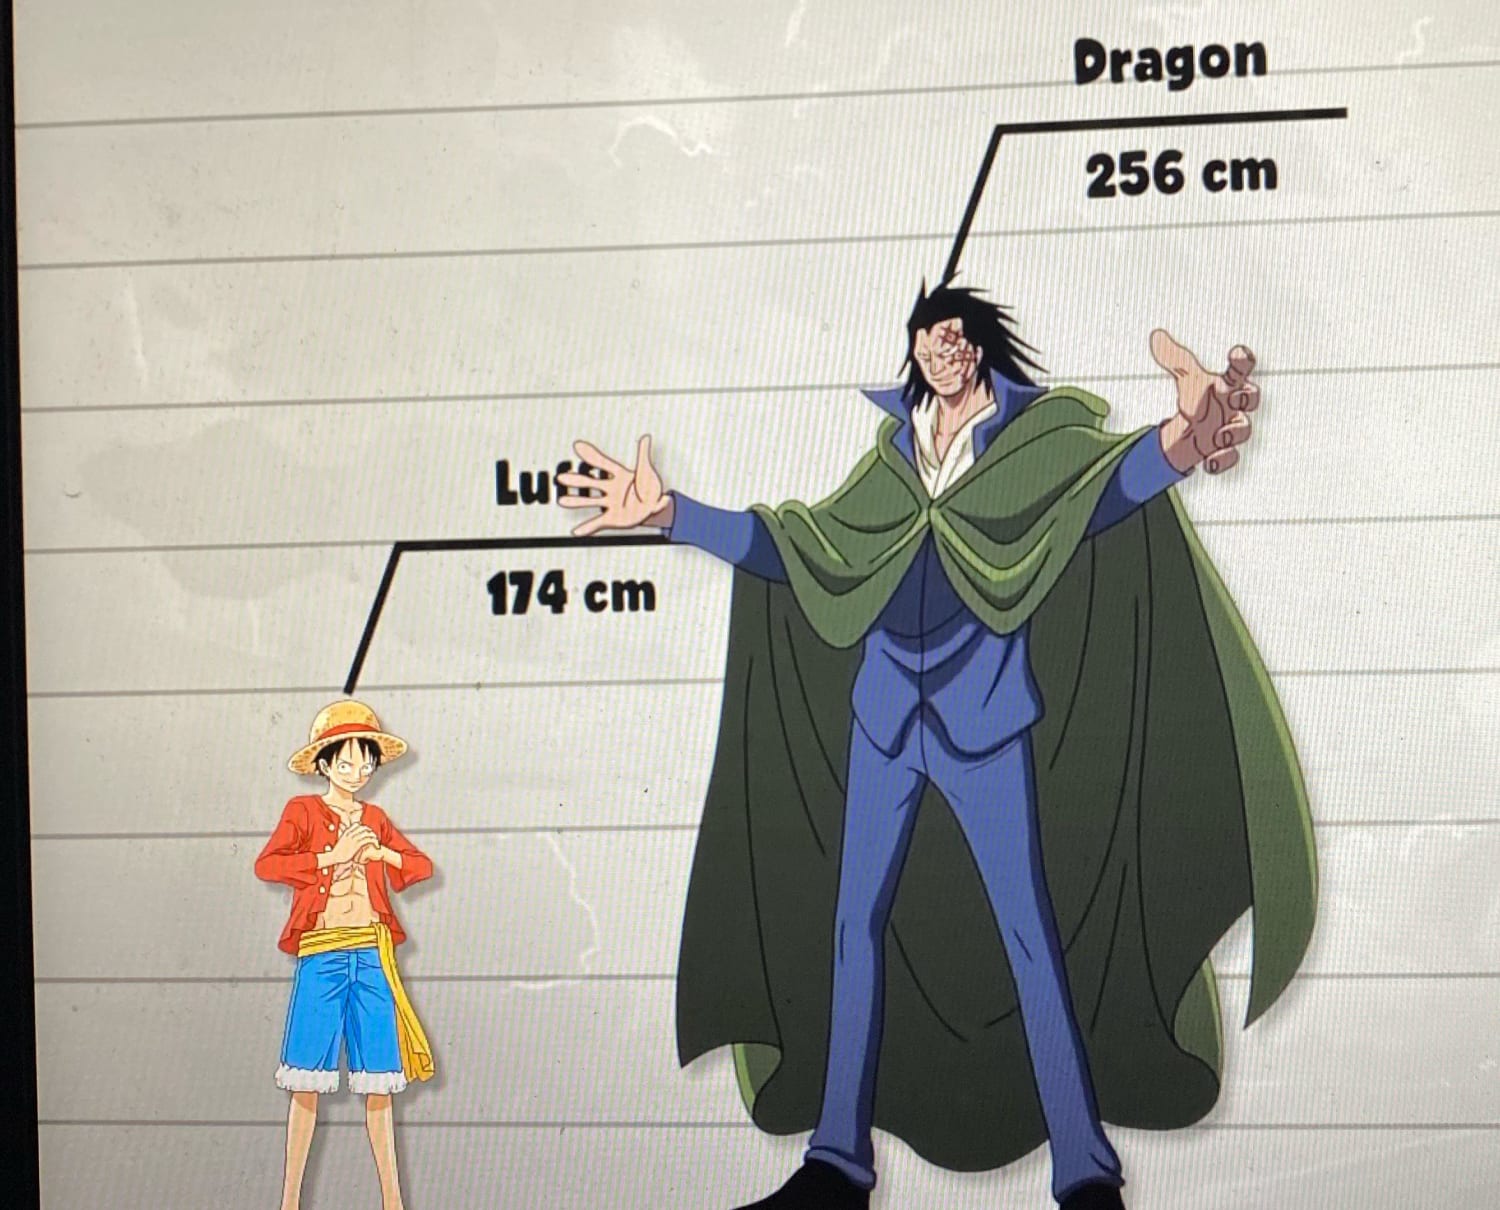 Will Luffy grow like Dragon? Would be normal right? But that wouldn’t fit.